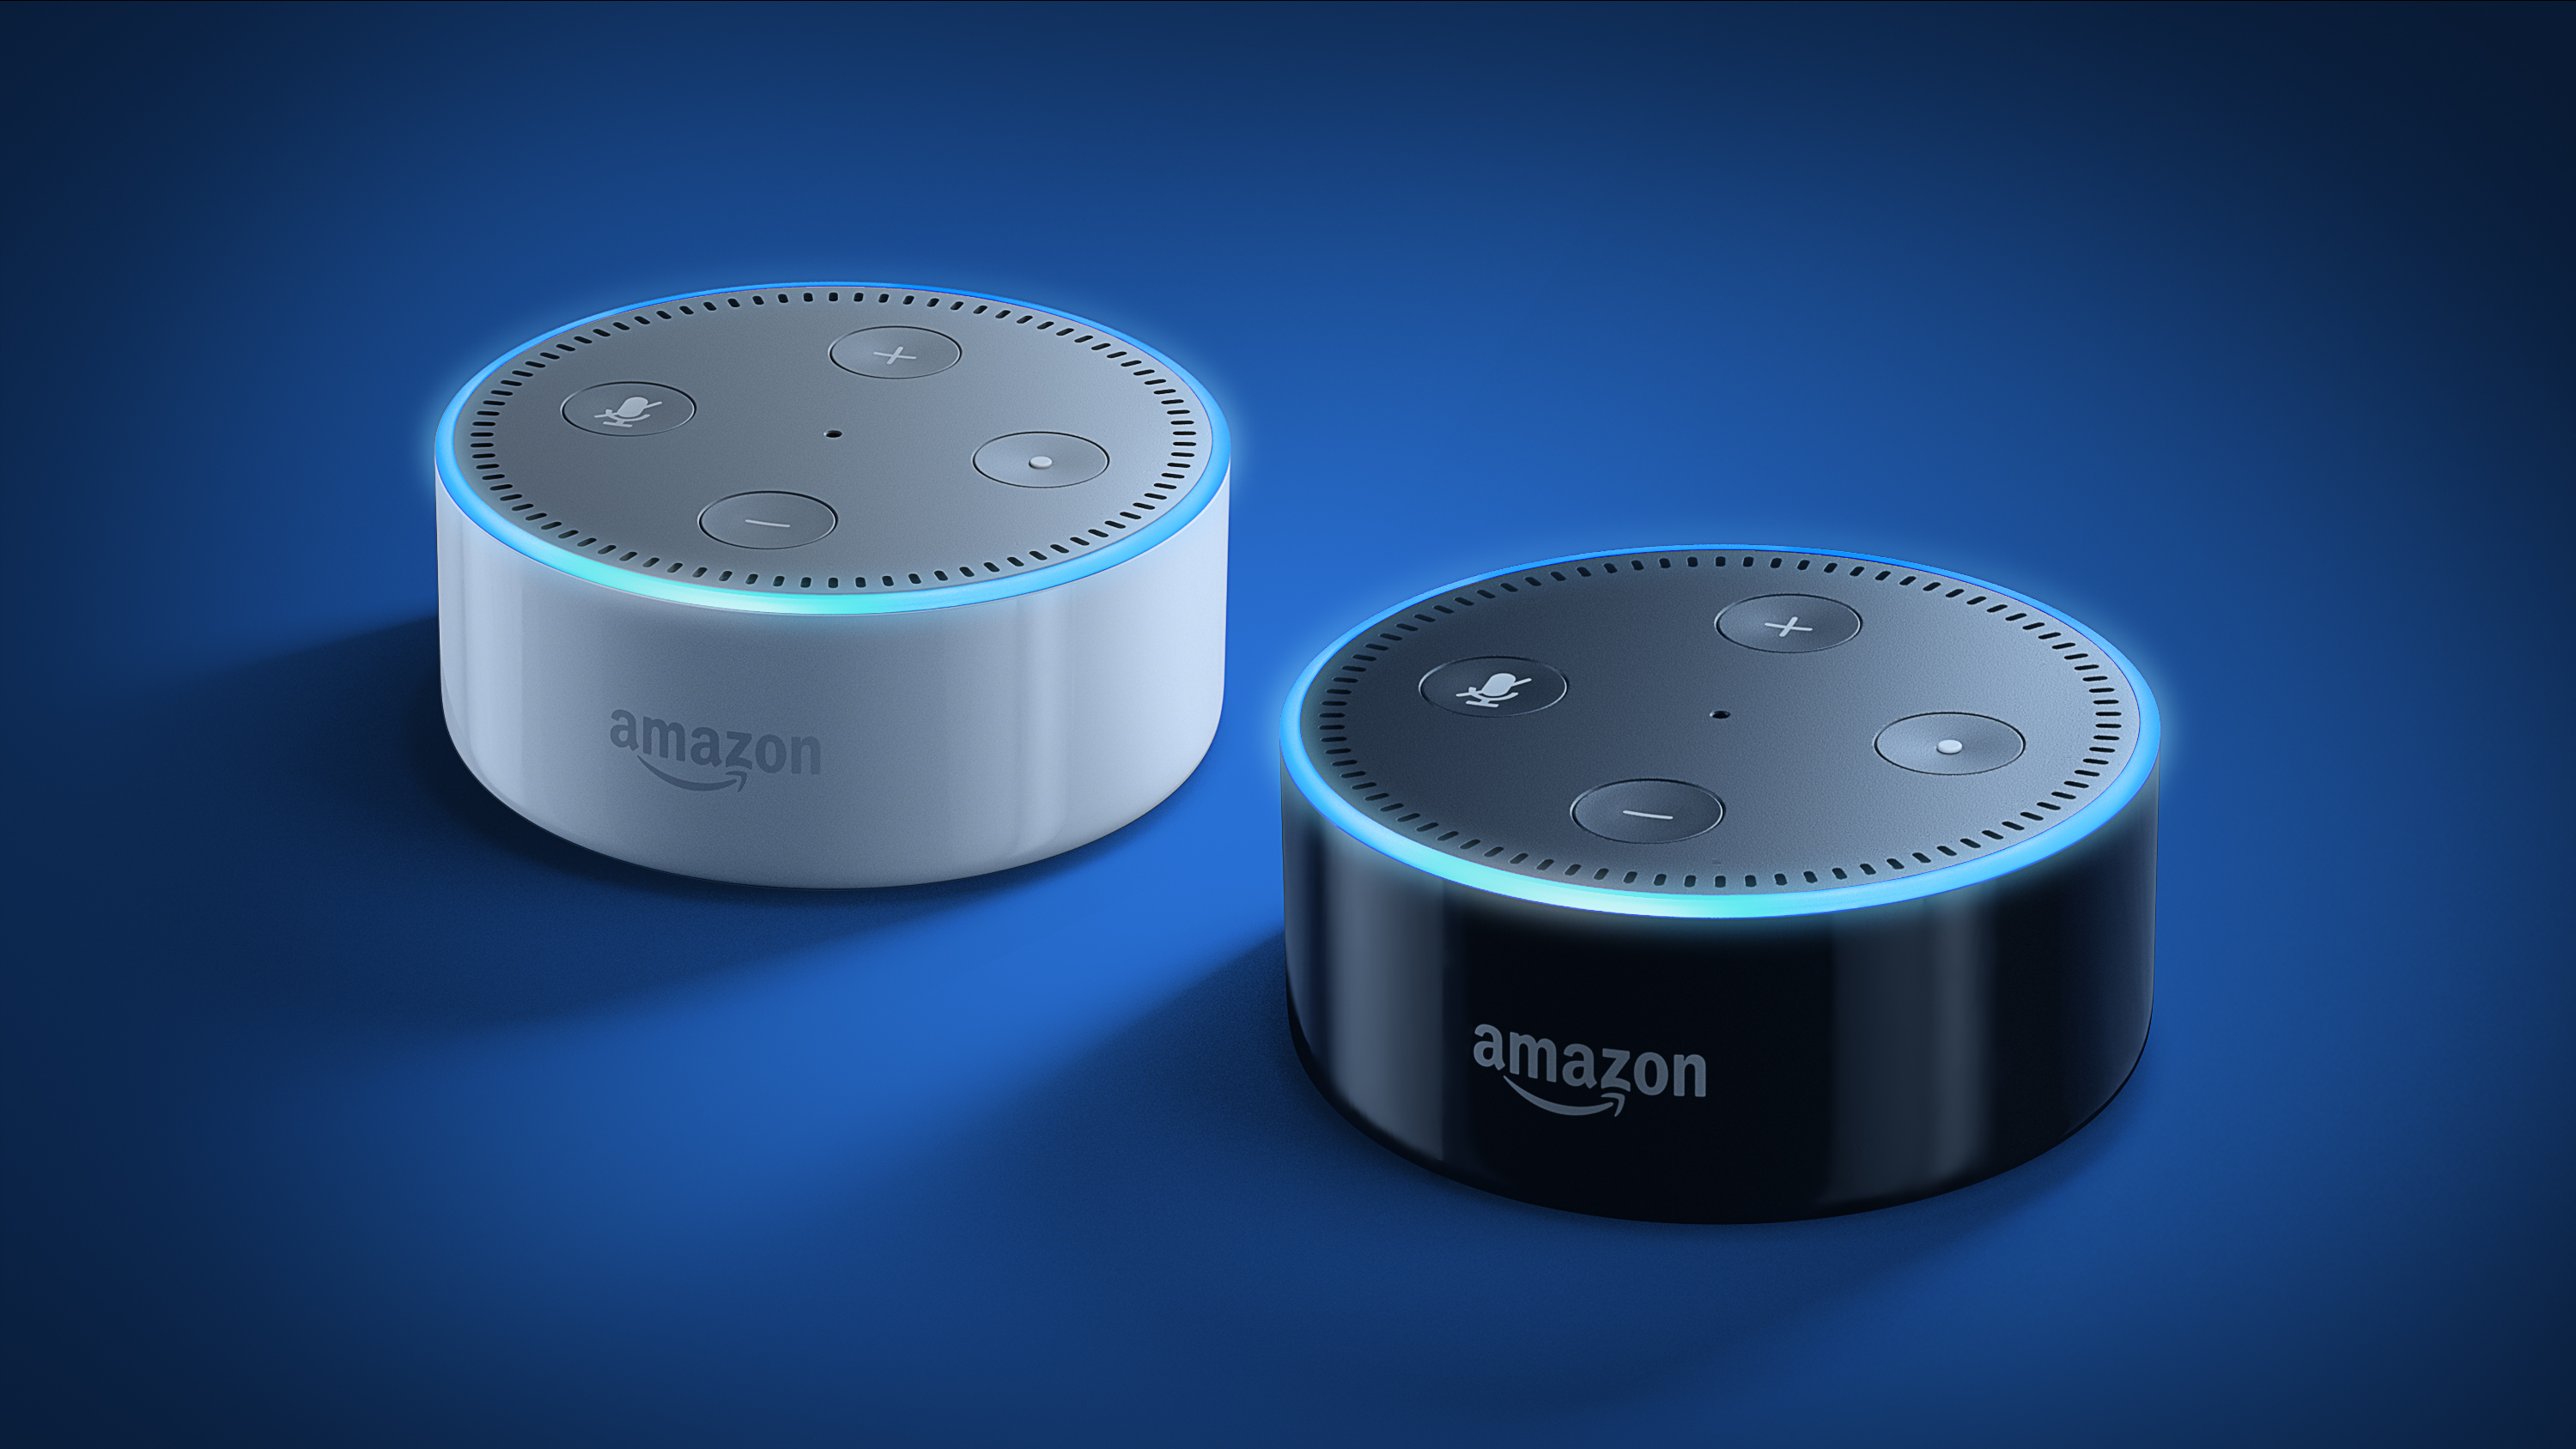 etage Antipoison Sammenligne Introducing the All-New Echo Dot—Add Alexa to Any Room for Less than $50 |  Business Wire